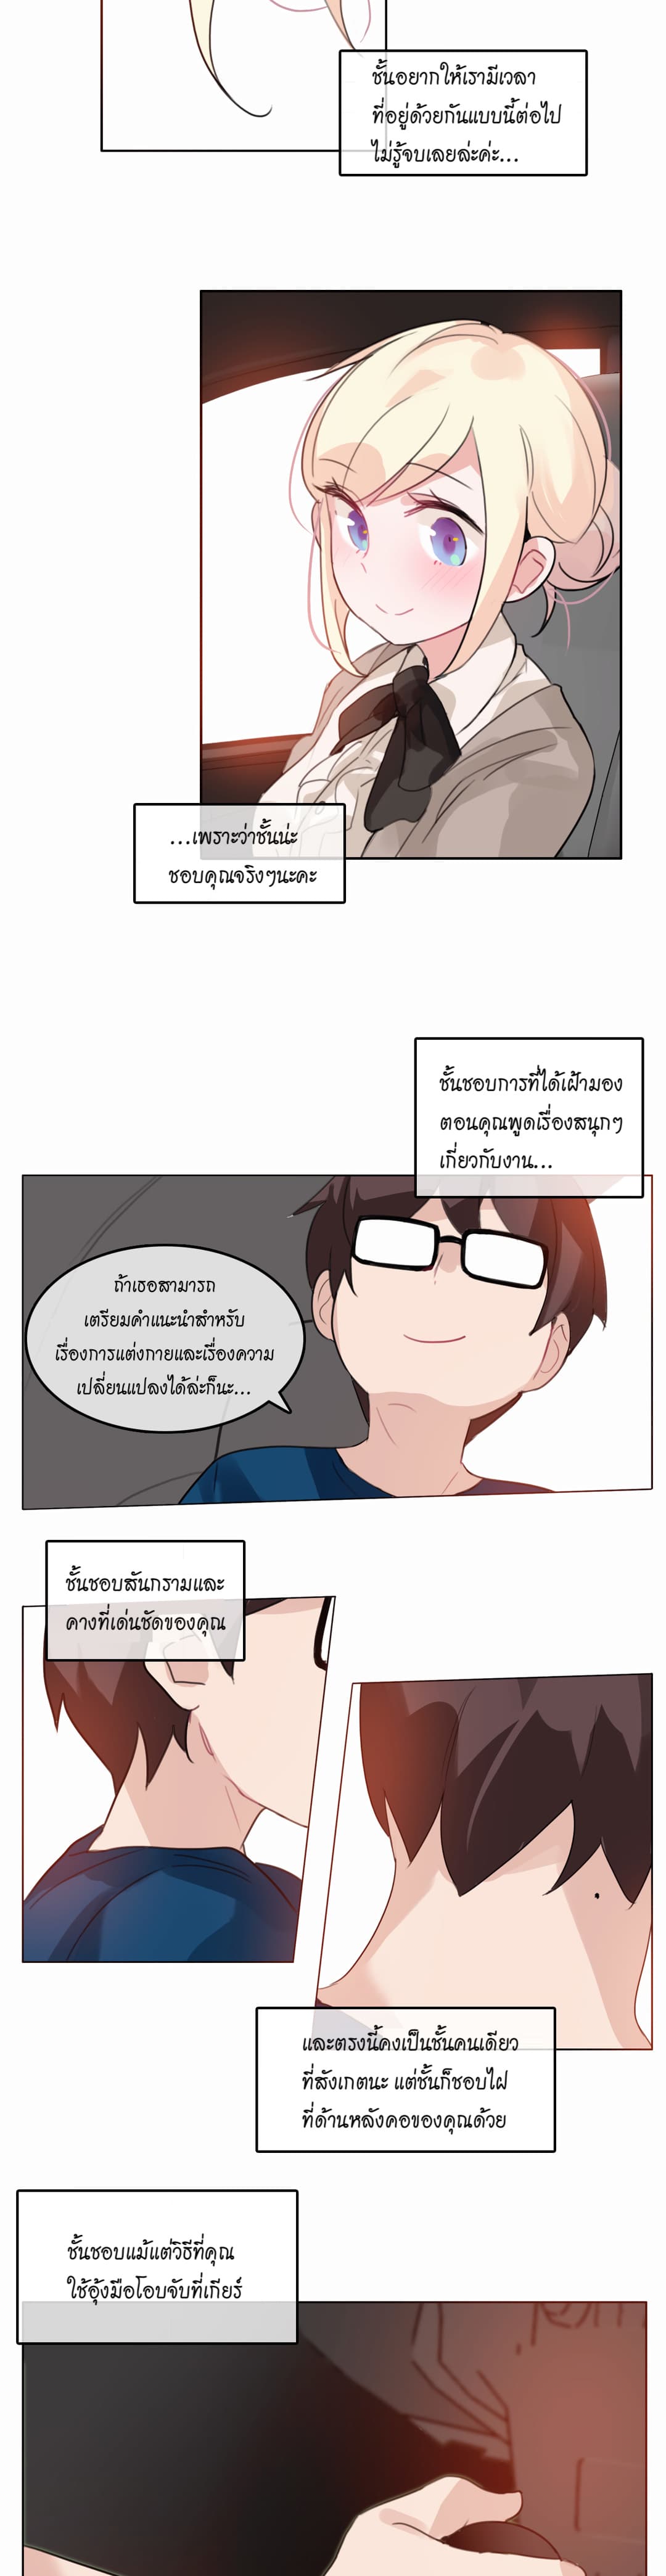 A Pervert’s Daily Life 19 (11)